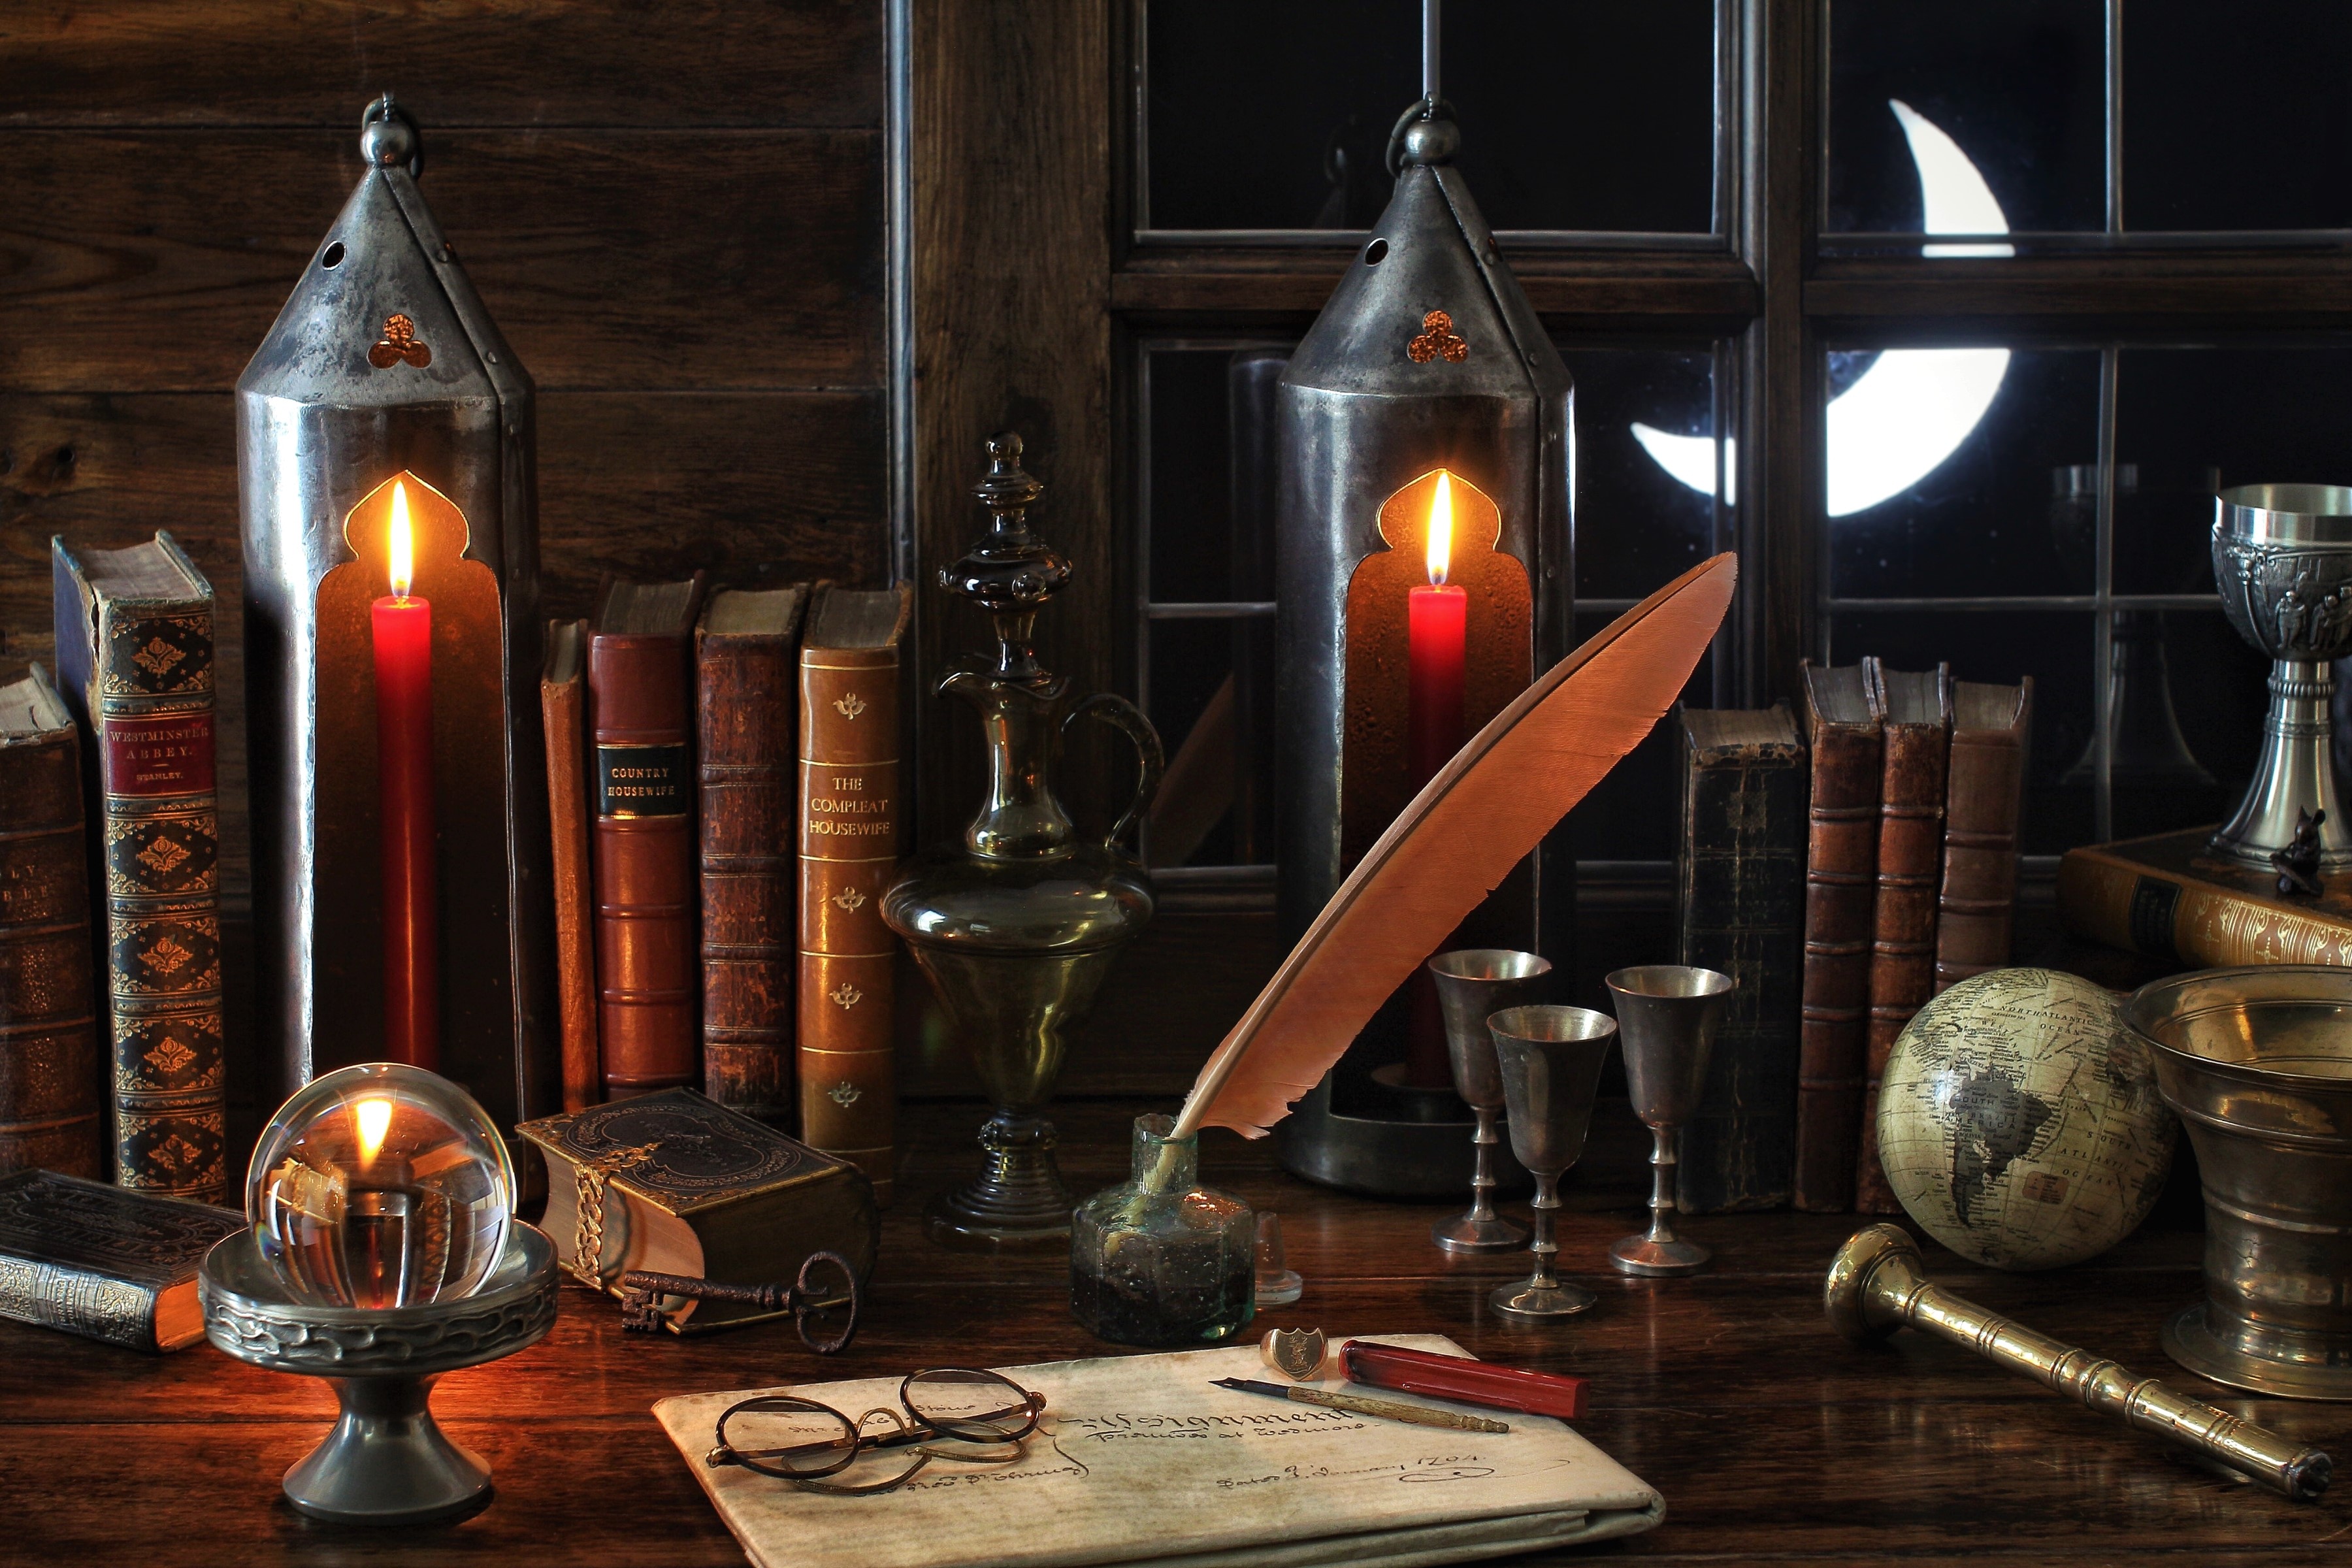 book, photography, still life, candle, crescent, glasses, globe, night, window